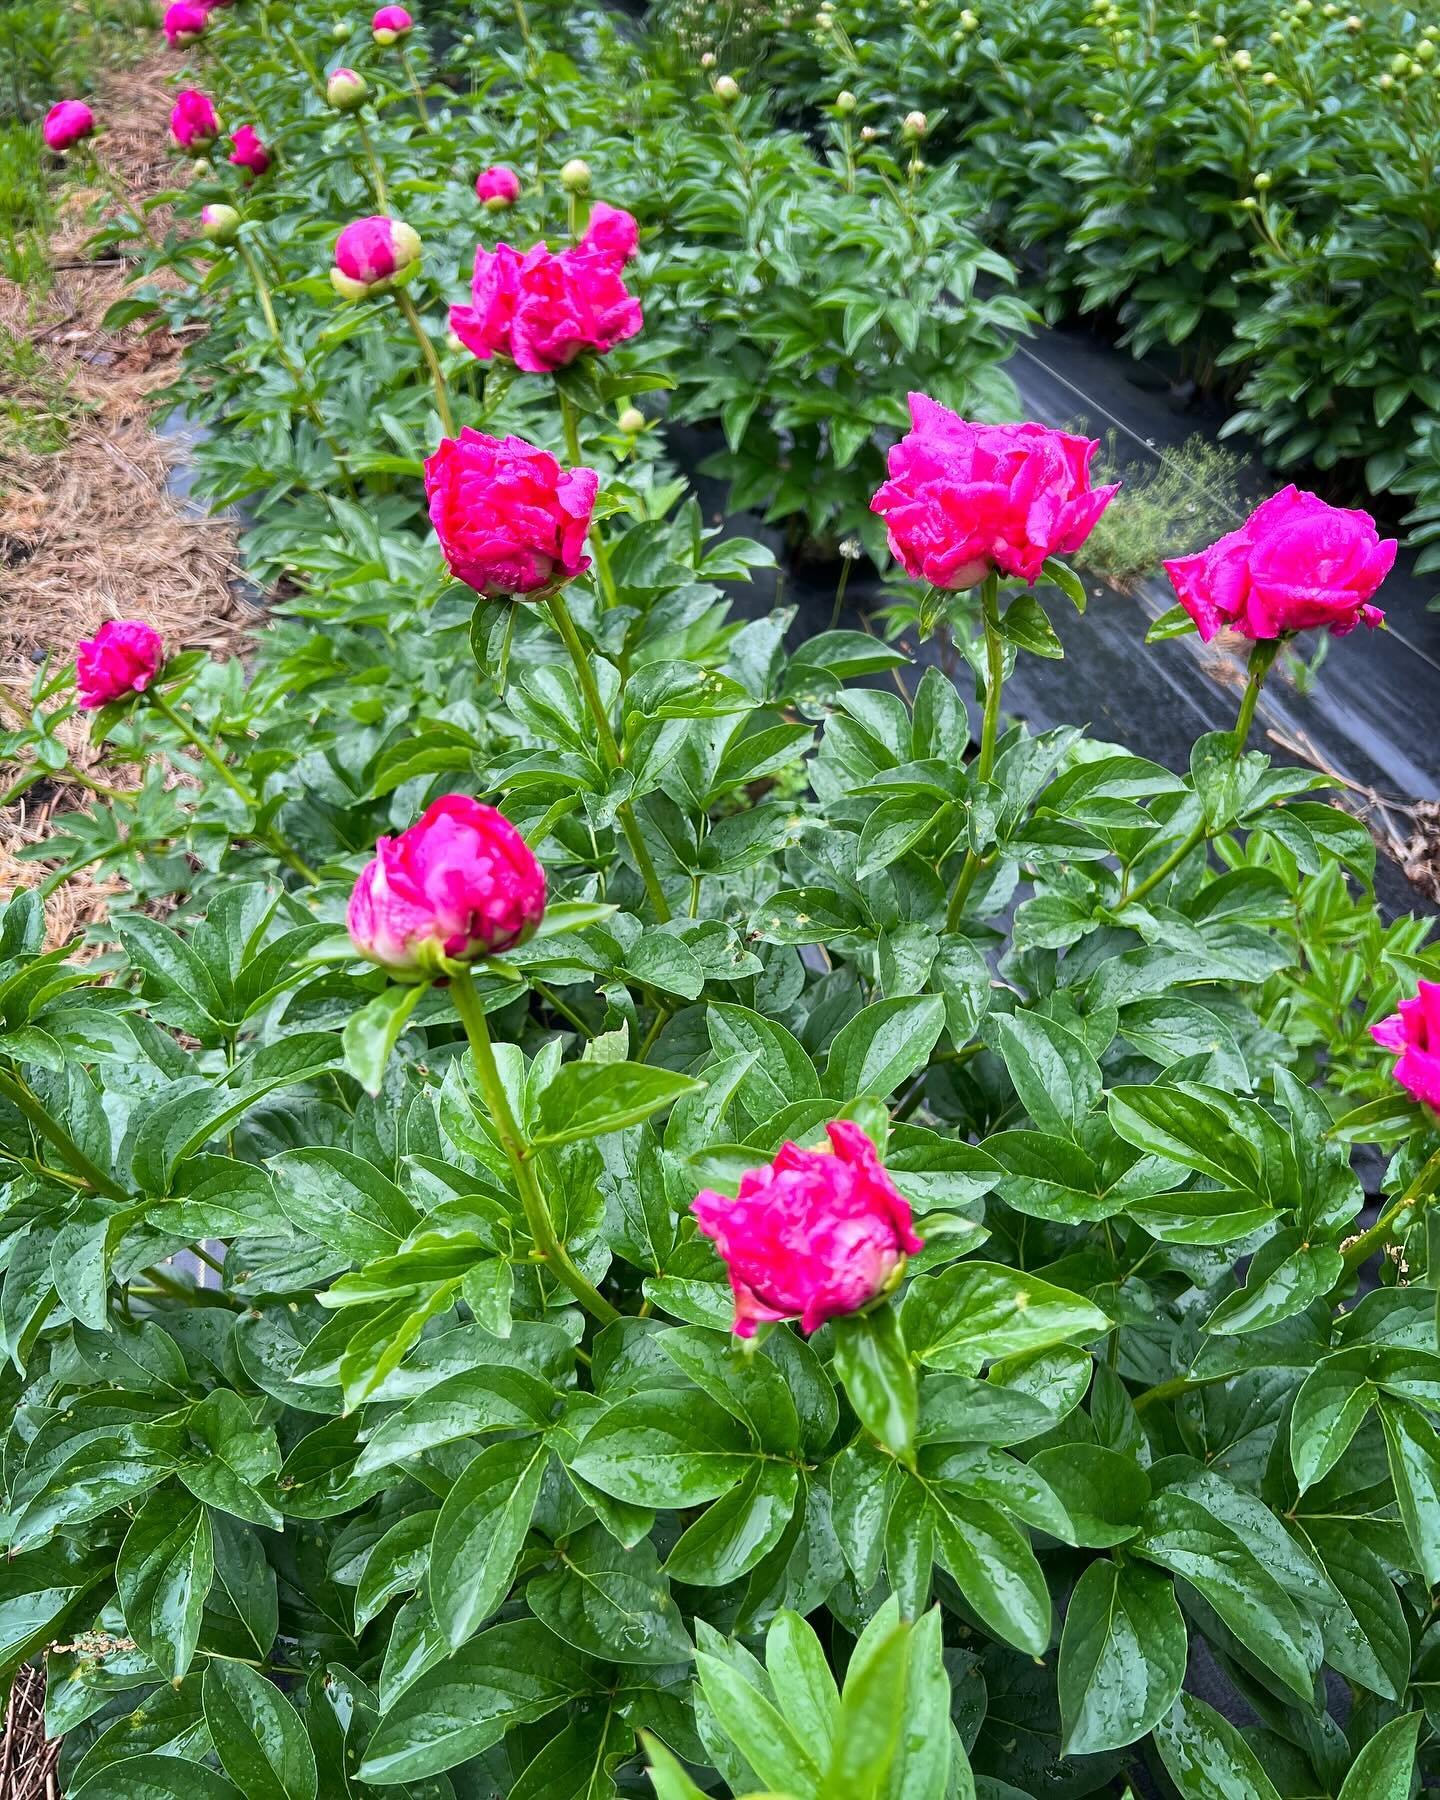 First year they sleep, second year they creep, third year they leap. This peony patch is in its second year so we won&rsquo;t really be cutting on it yet&hellip;but a couple peonies might find their way into our Mom Bouquets, who can say.
.
.
.
#peon